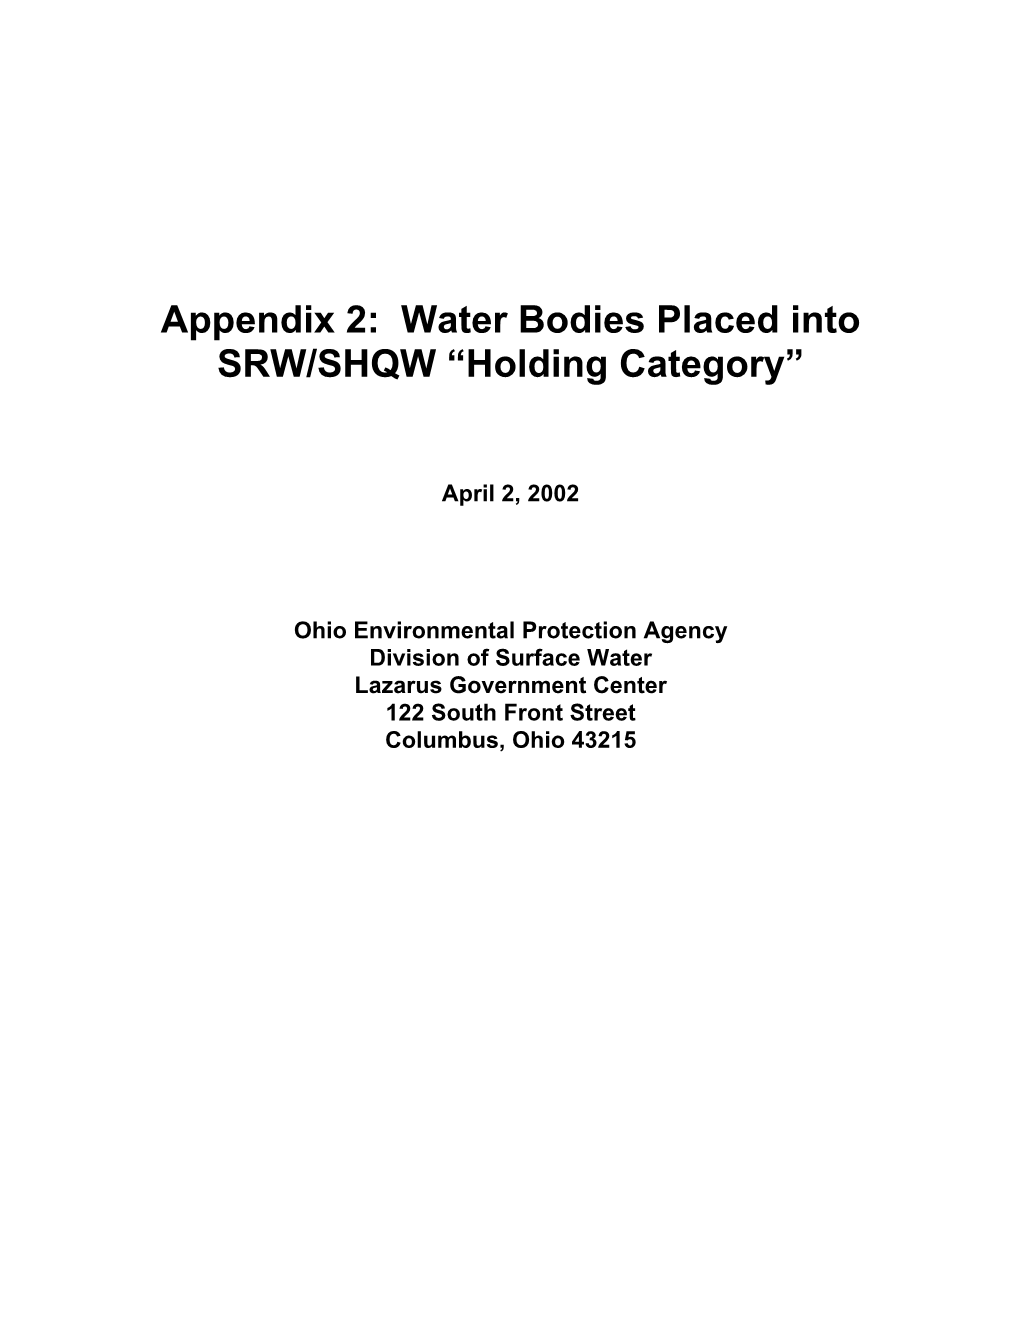 Appendix 2: Water Bodies Placed Into SRW/SHQW “Holding Category”